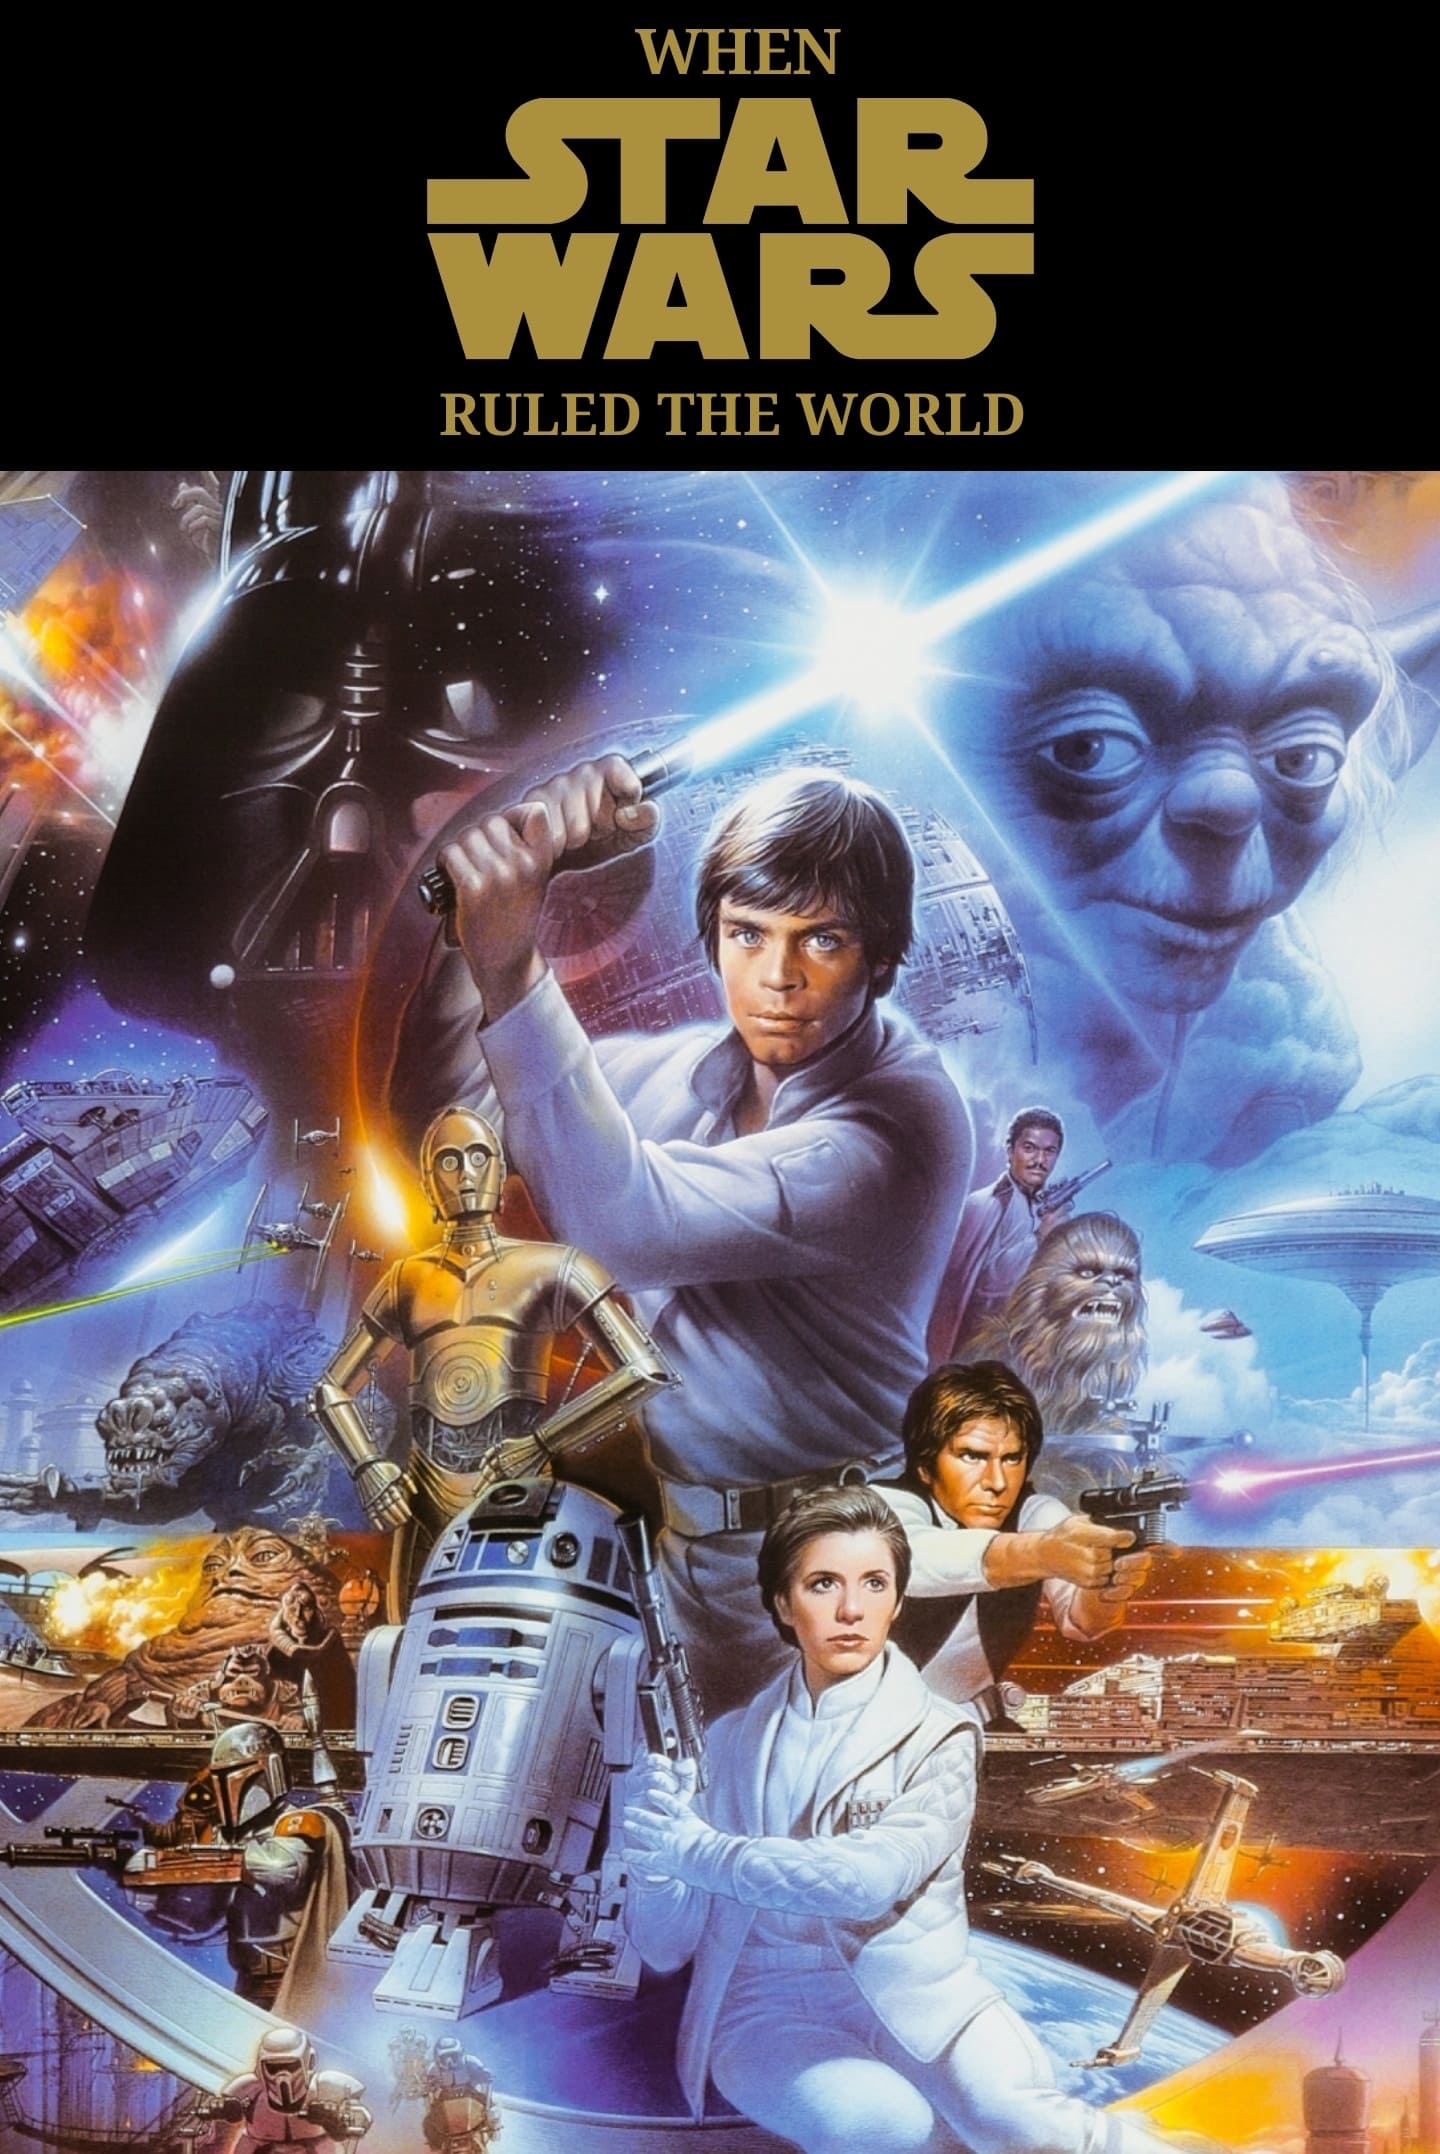 When Star Wars Ruled the World (2004)